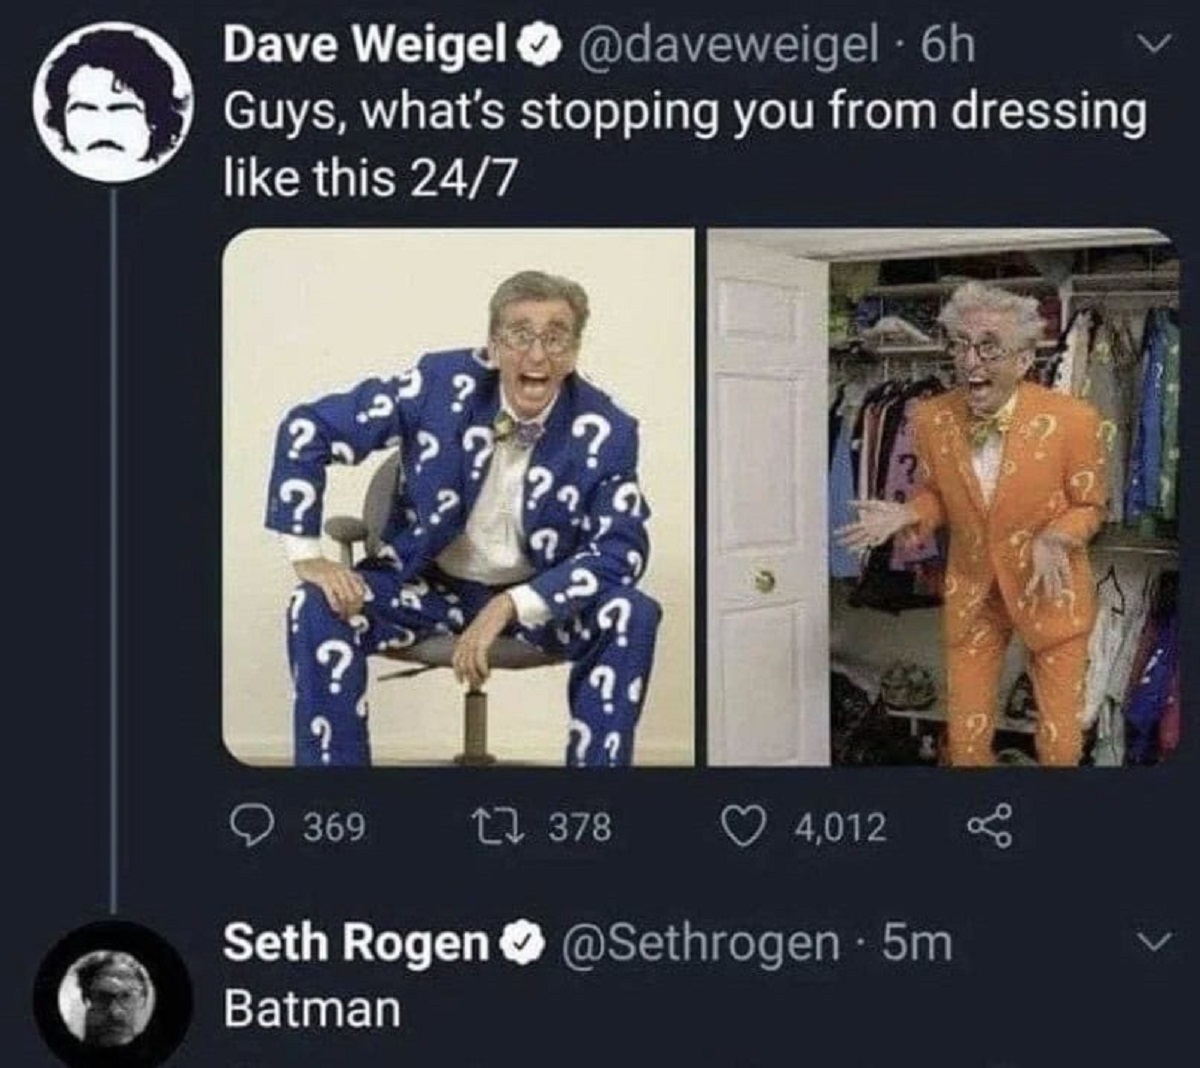 stops you from dressing like this batman - Dave Weigel. 6h Guys, what's stopping you from dressing this 247 ? 369 17 378 4,012 Seth Rogen 5m Batman